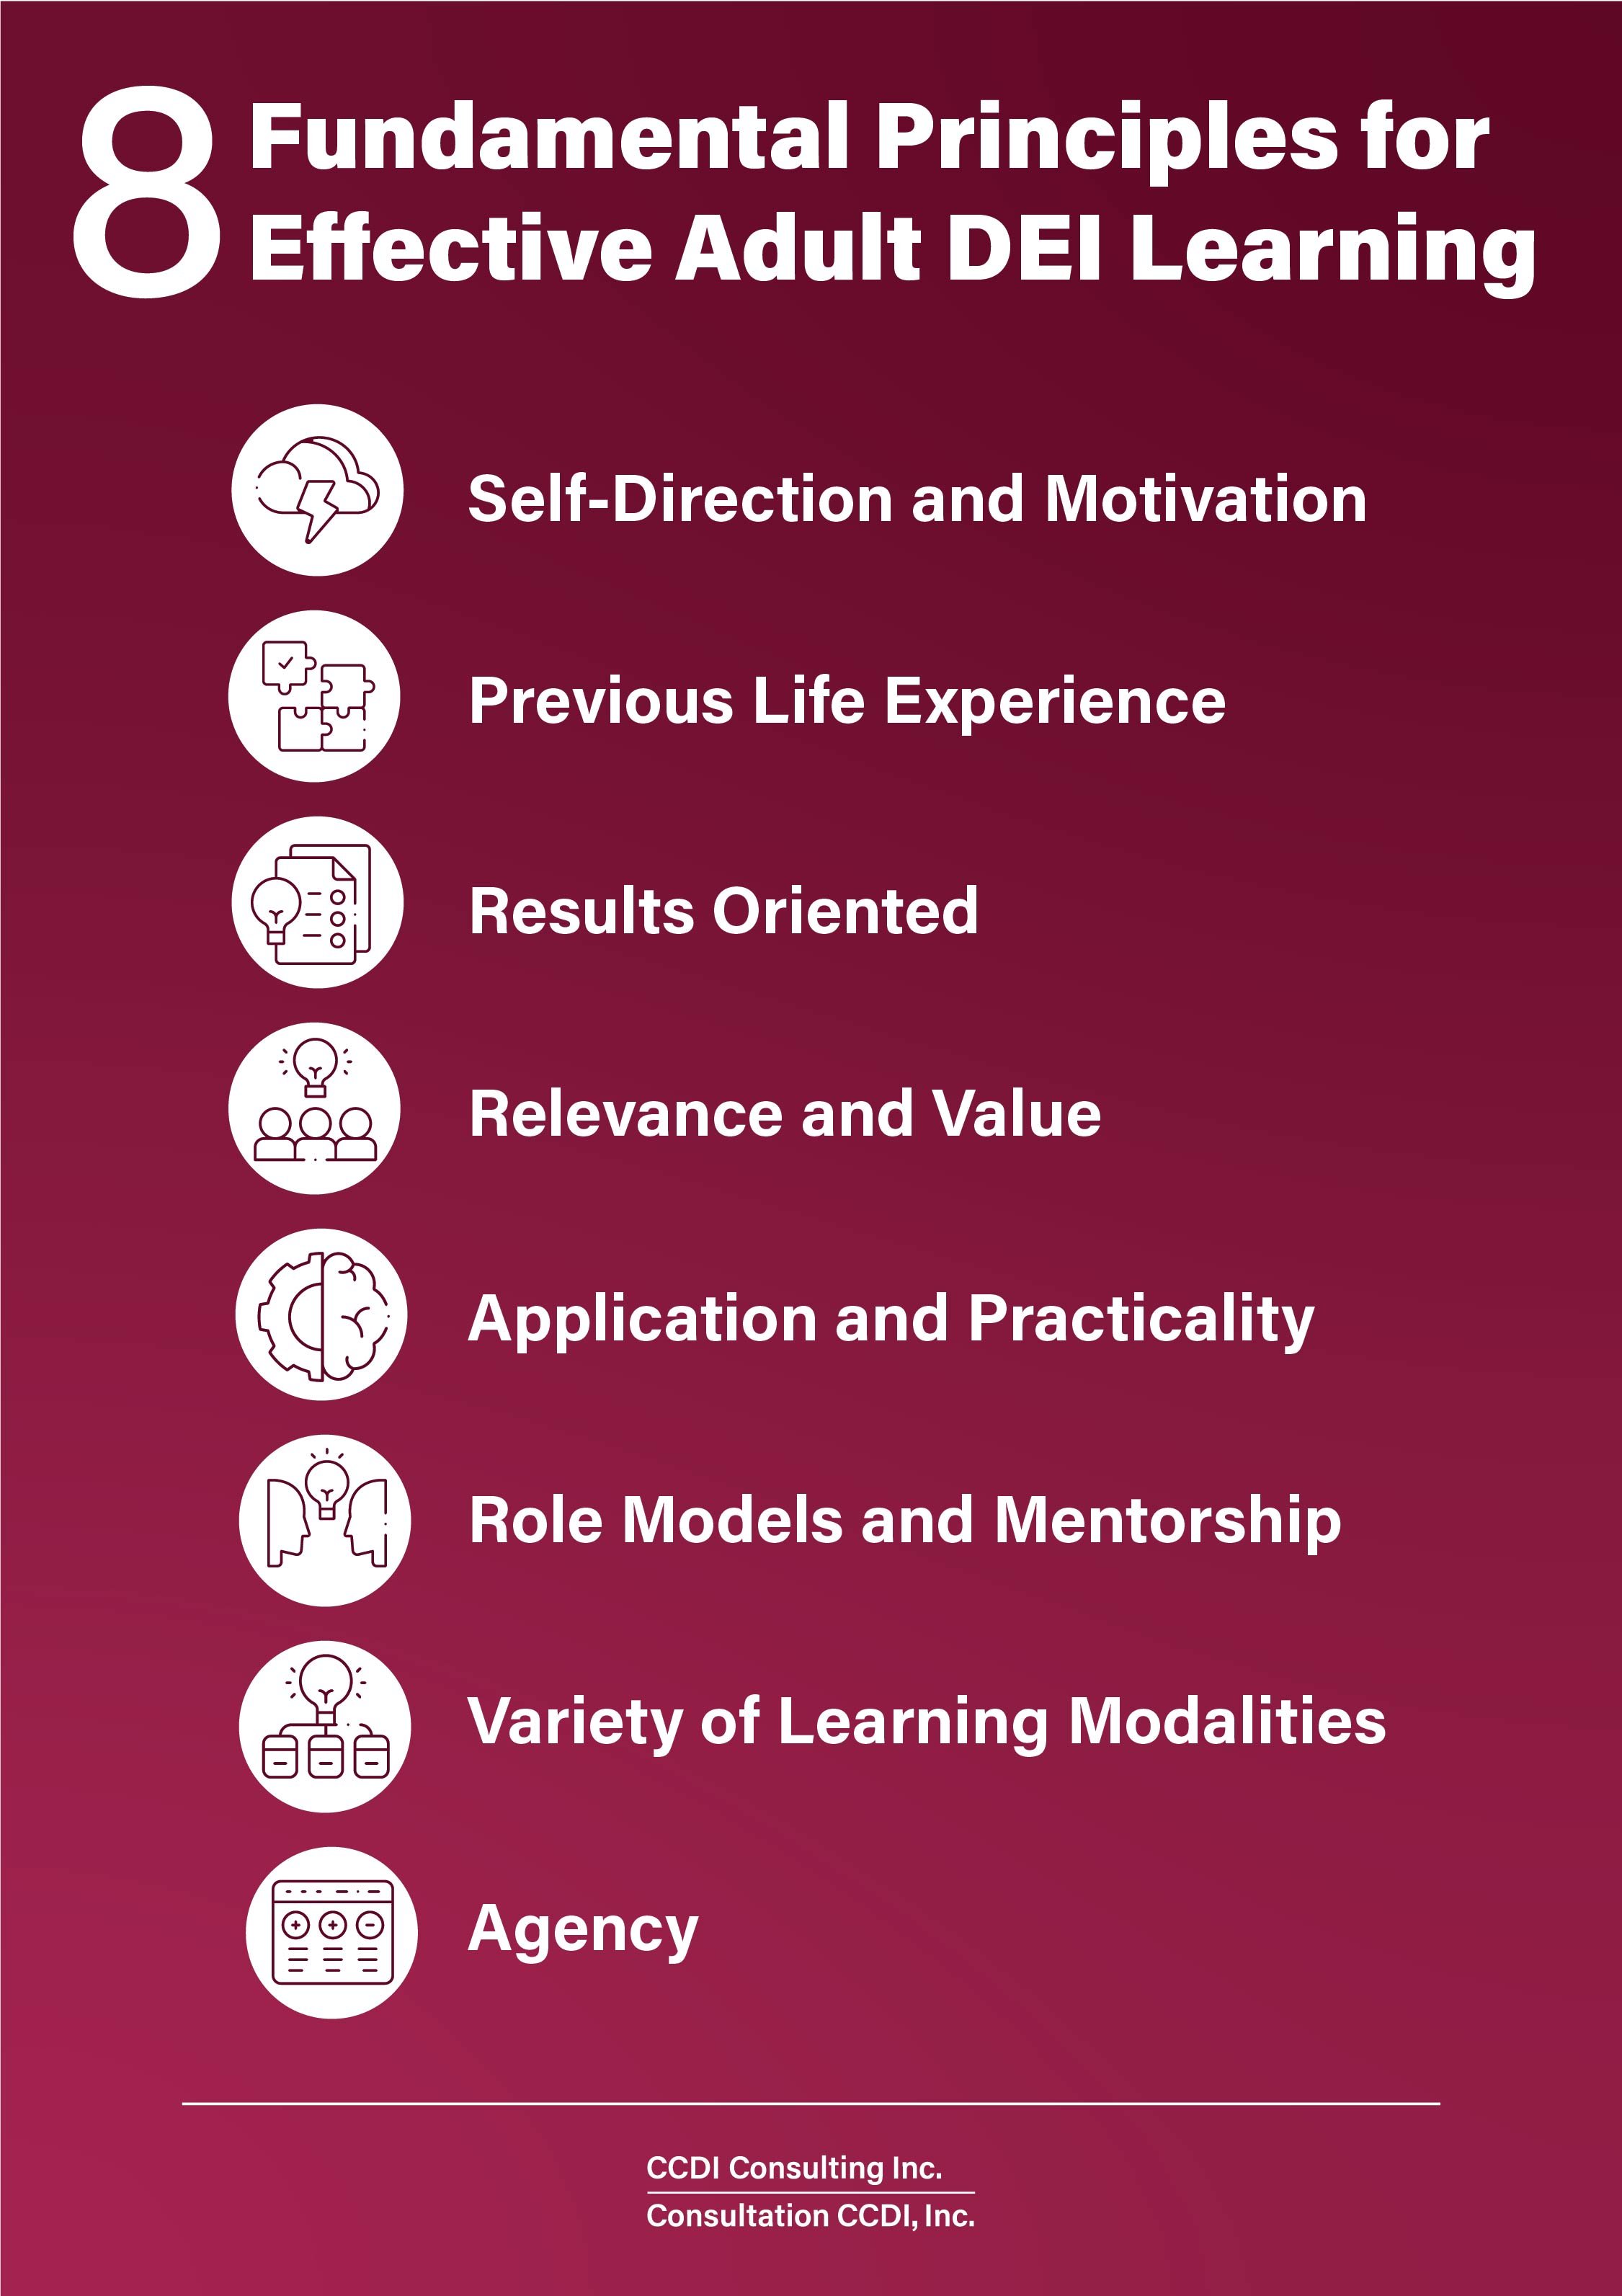 8 Fundamental Principles for Effective Adult DEI Learning Infographic